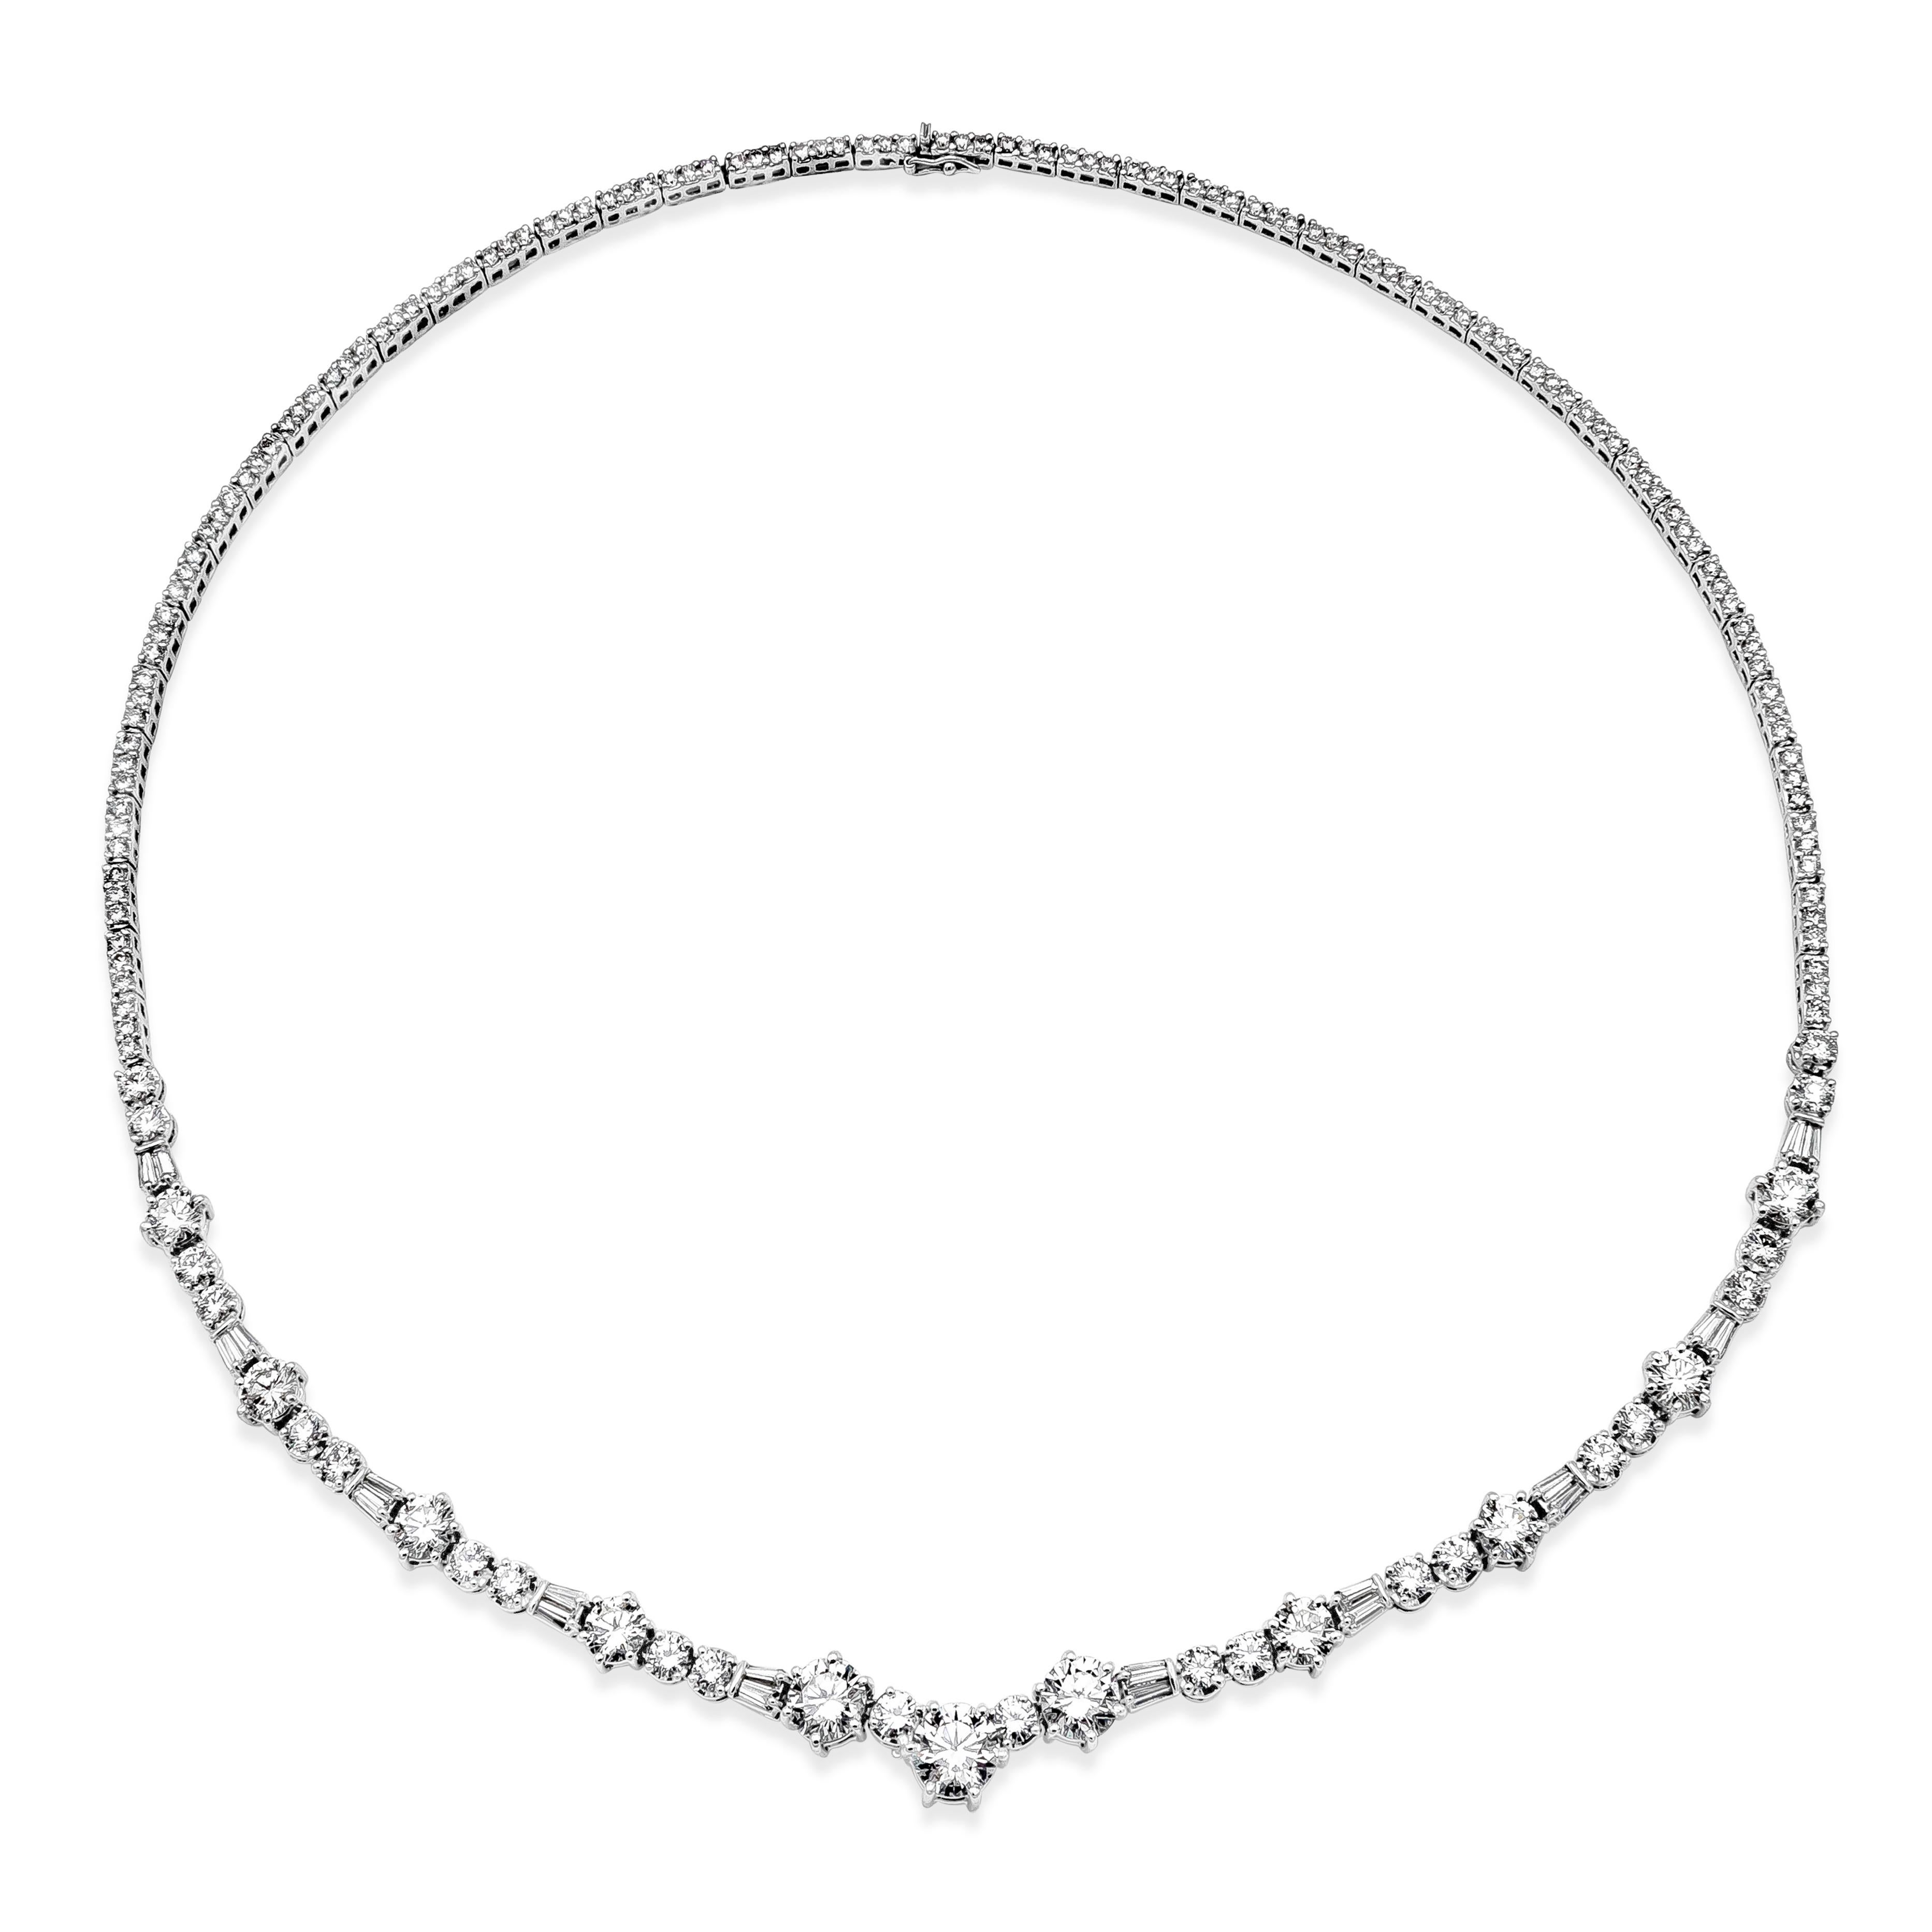 Contemporary Roman Malakov, 8.71 Carat Total Round And Baguette Diamond Tennis Necklace For Sale